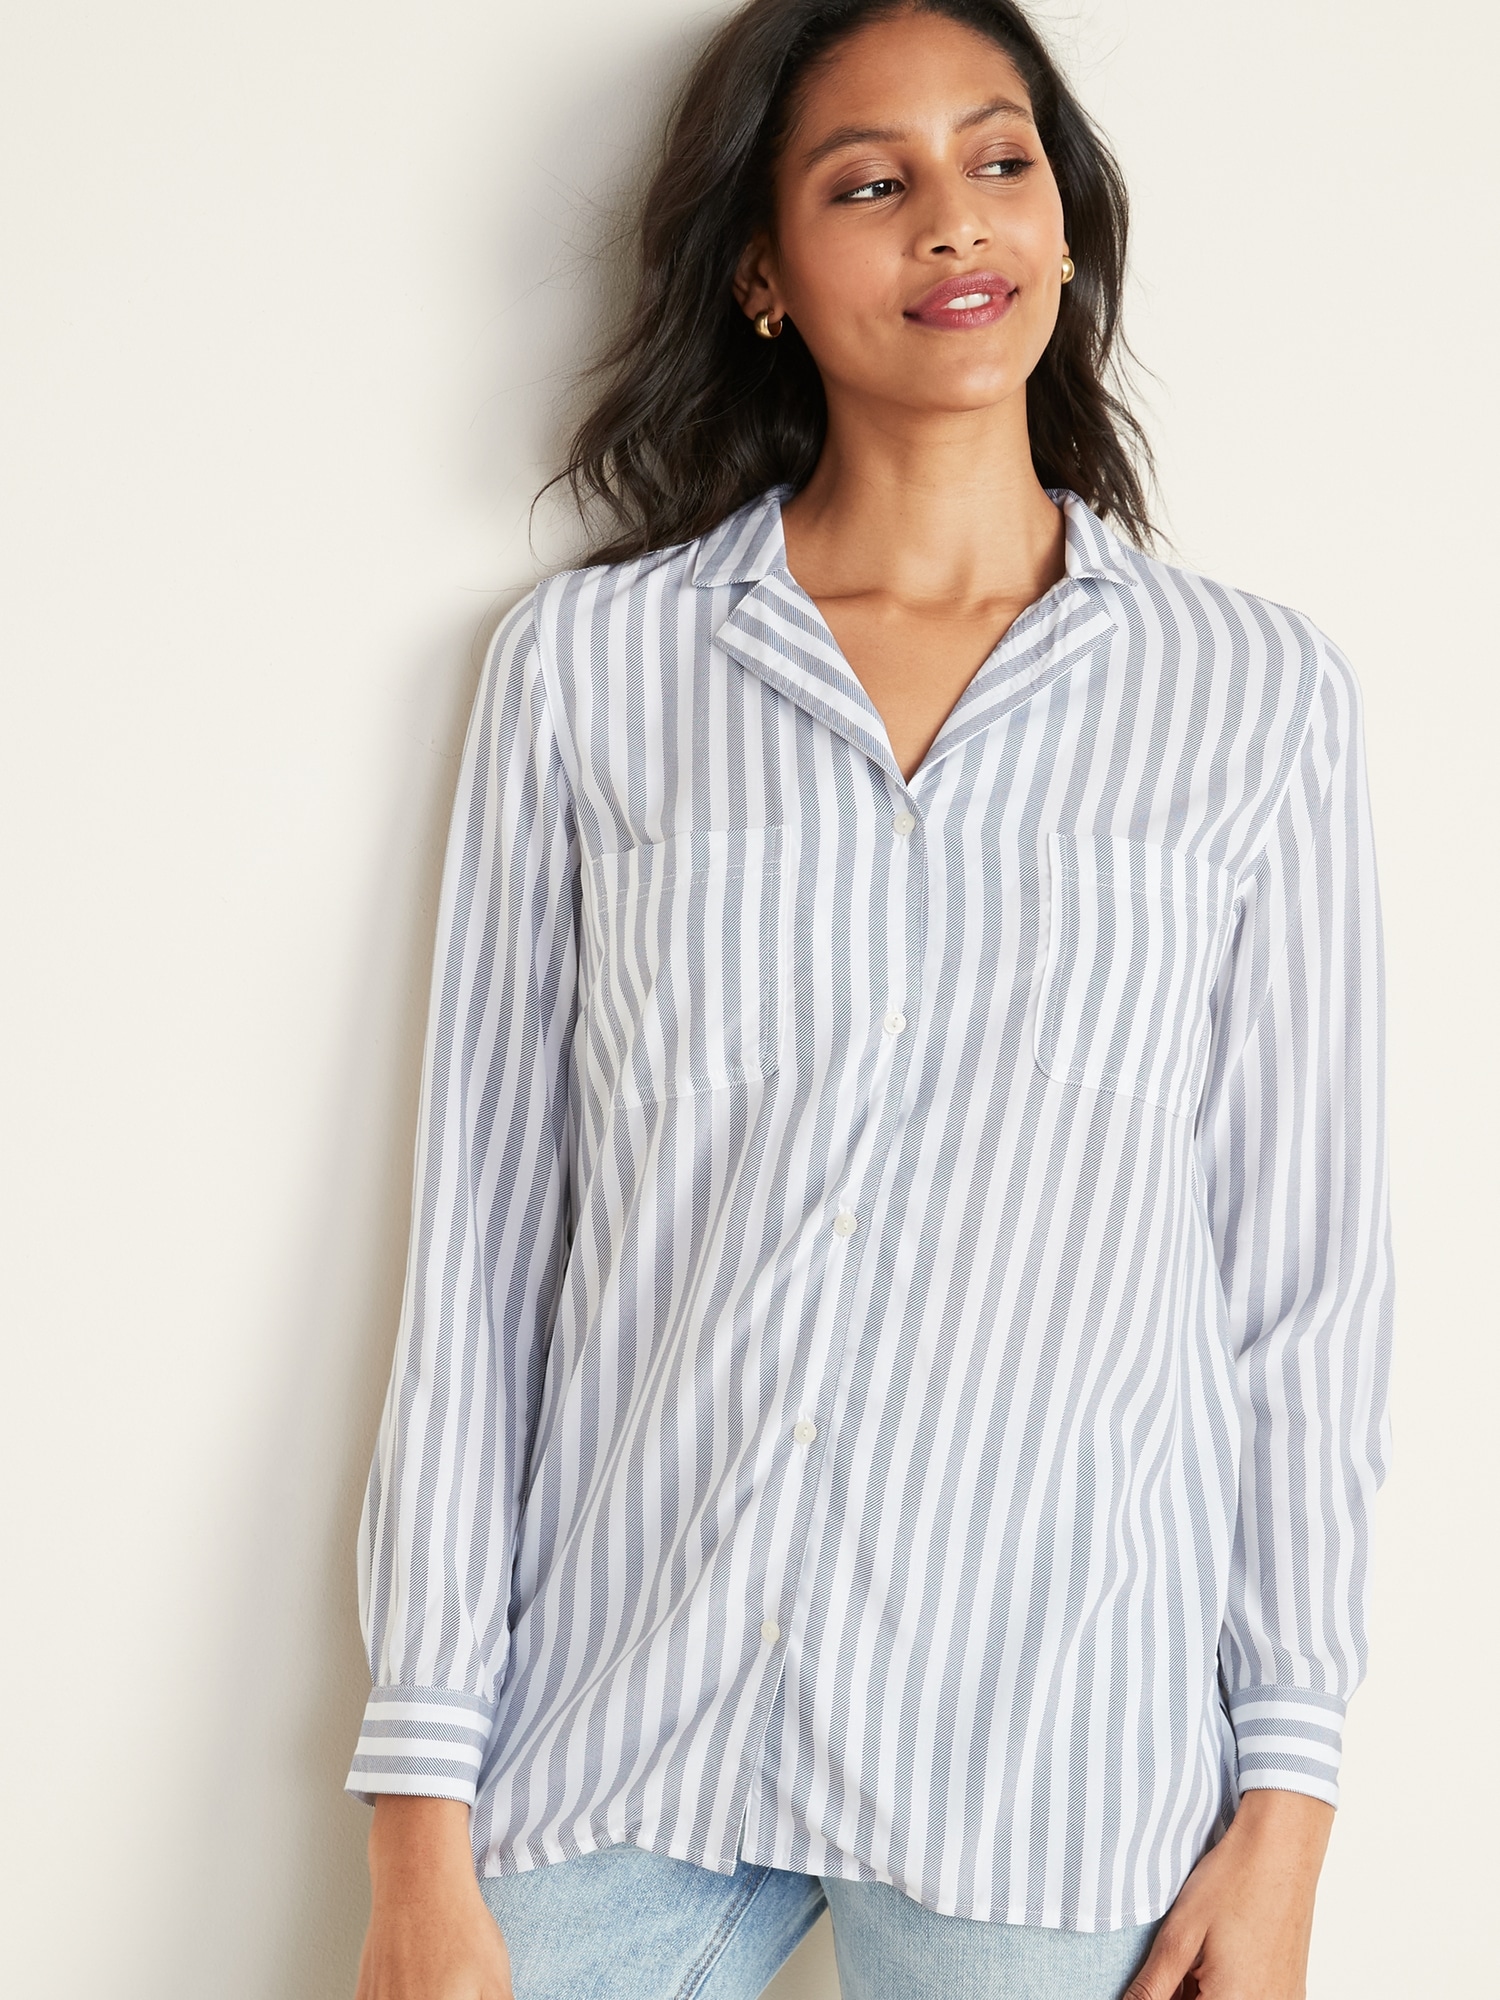 Striped Pocket Shirt for Women | Old Navy